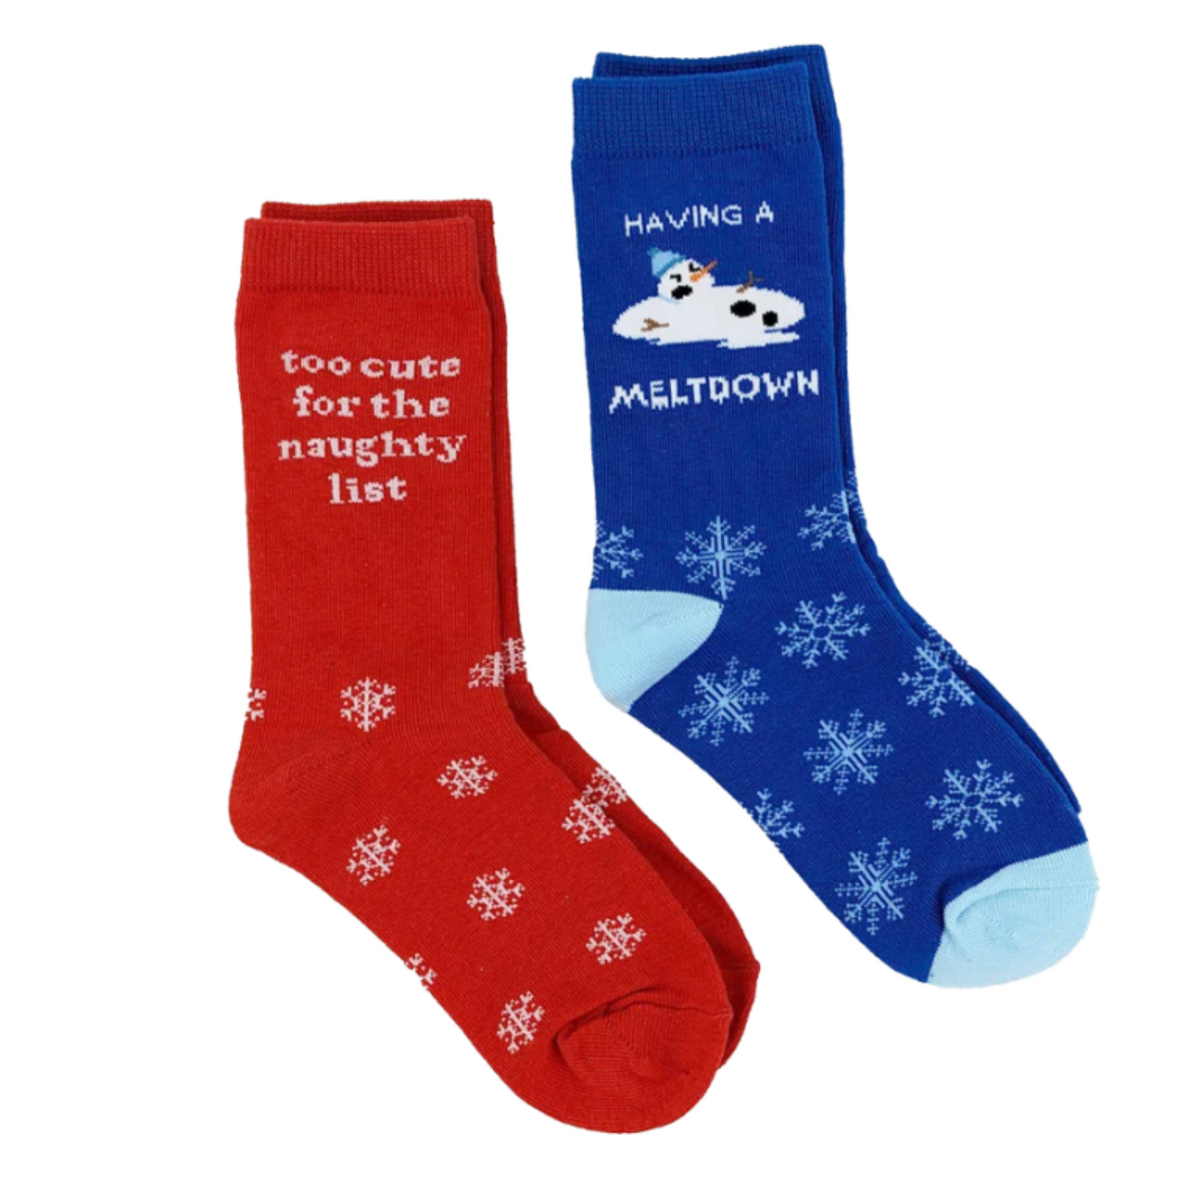 Sock Harbor Holiday 2-pack kids&#39; crew socks featuring red sock with snowflakes that says &quot;Too cute for the naughty list&quot; and blue sock with snowflakes and melting snowman that says &quot;Having a meltdown&quot;. Socks shown laying flat on display. 